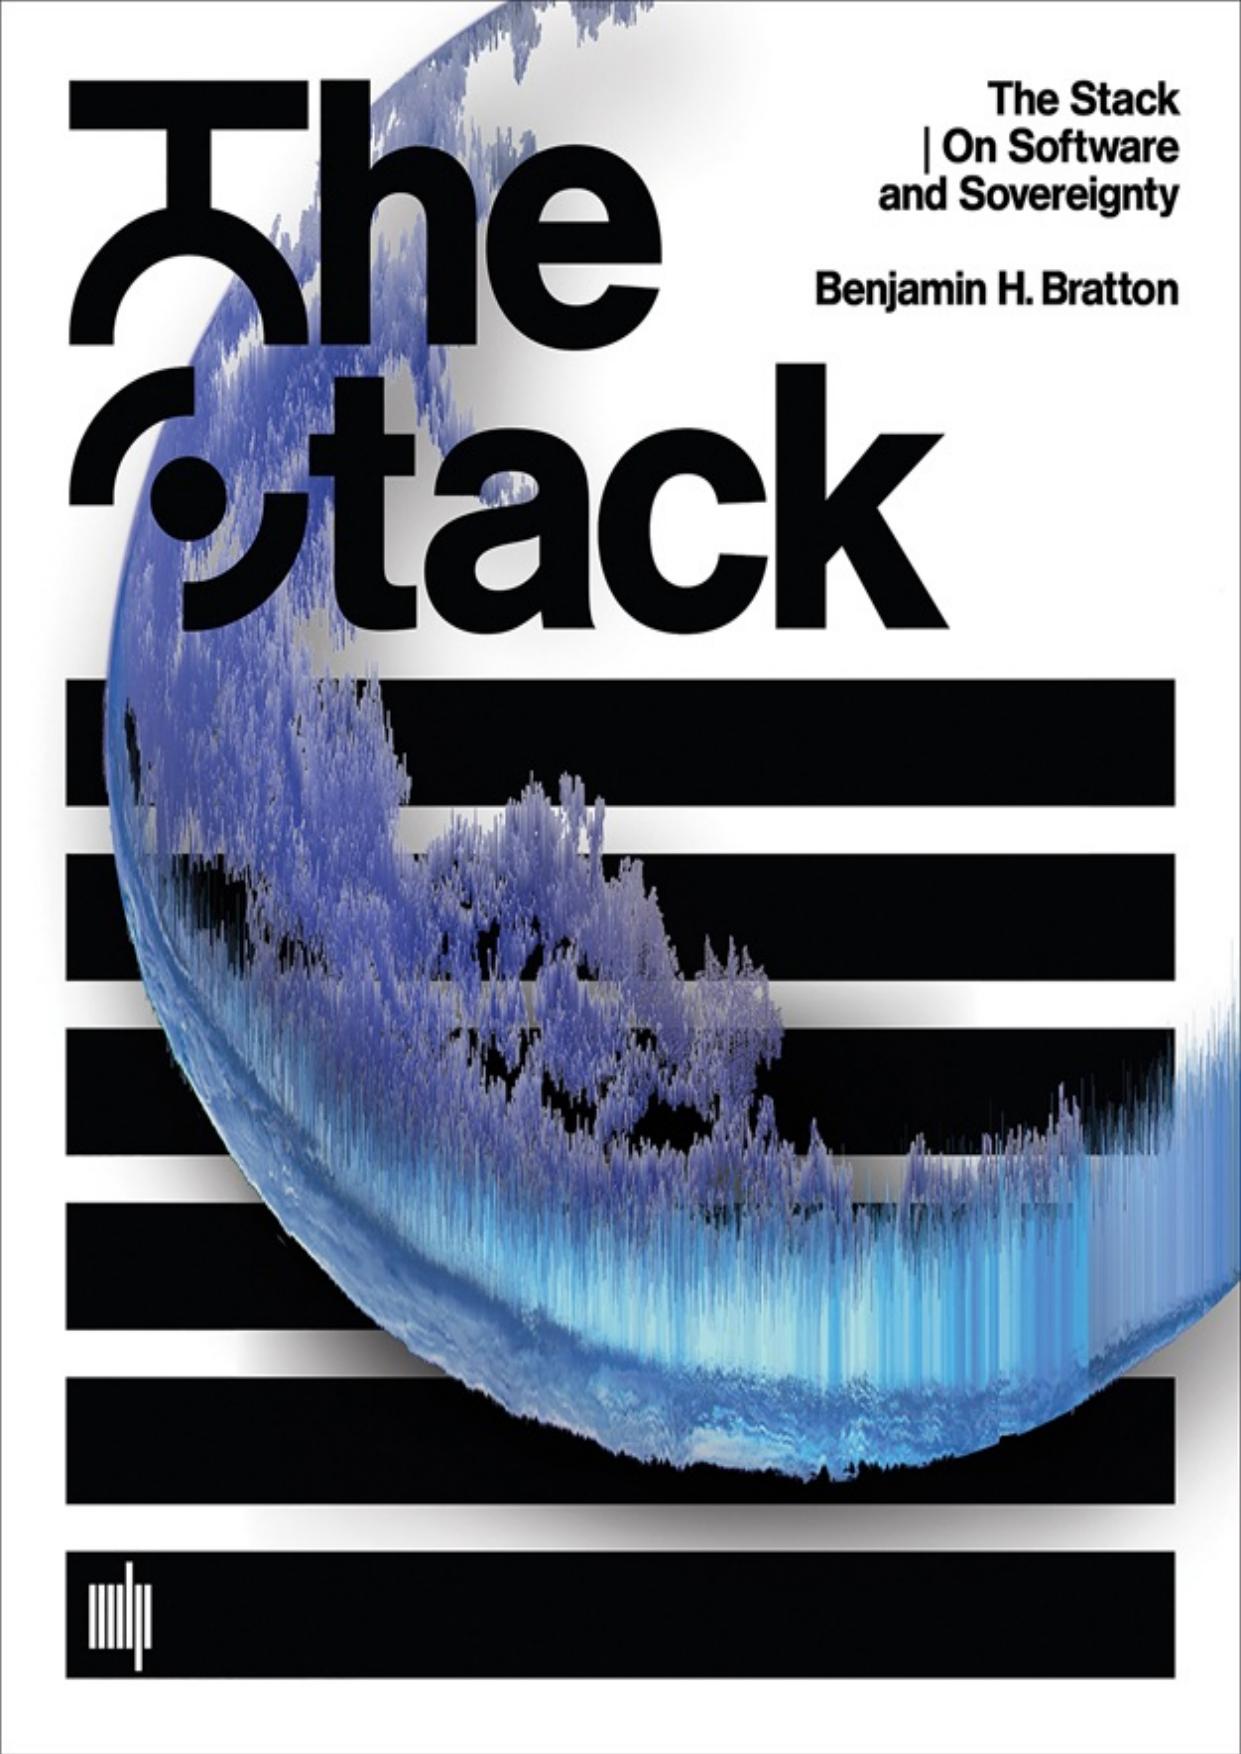 The Stack: On Software and Sovereignty (Software Studies) by Benjamin H. Bratton